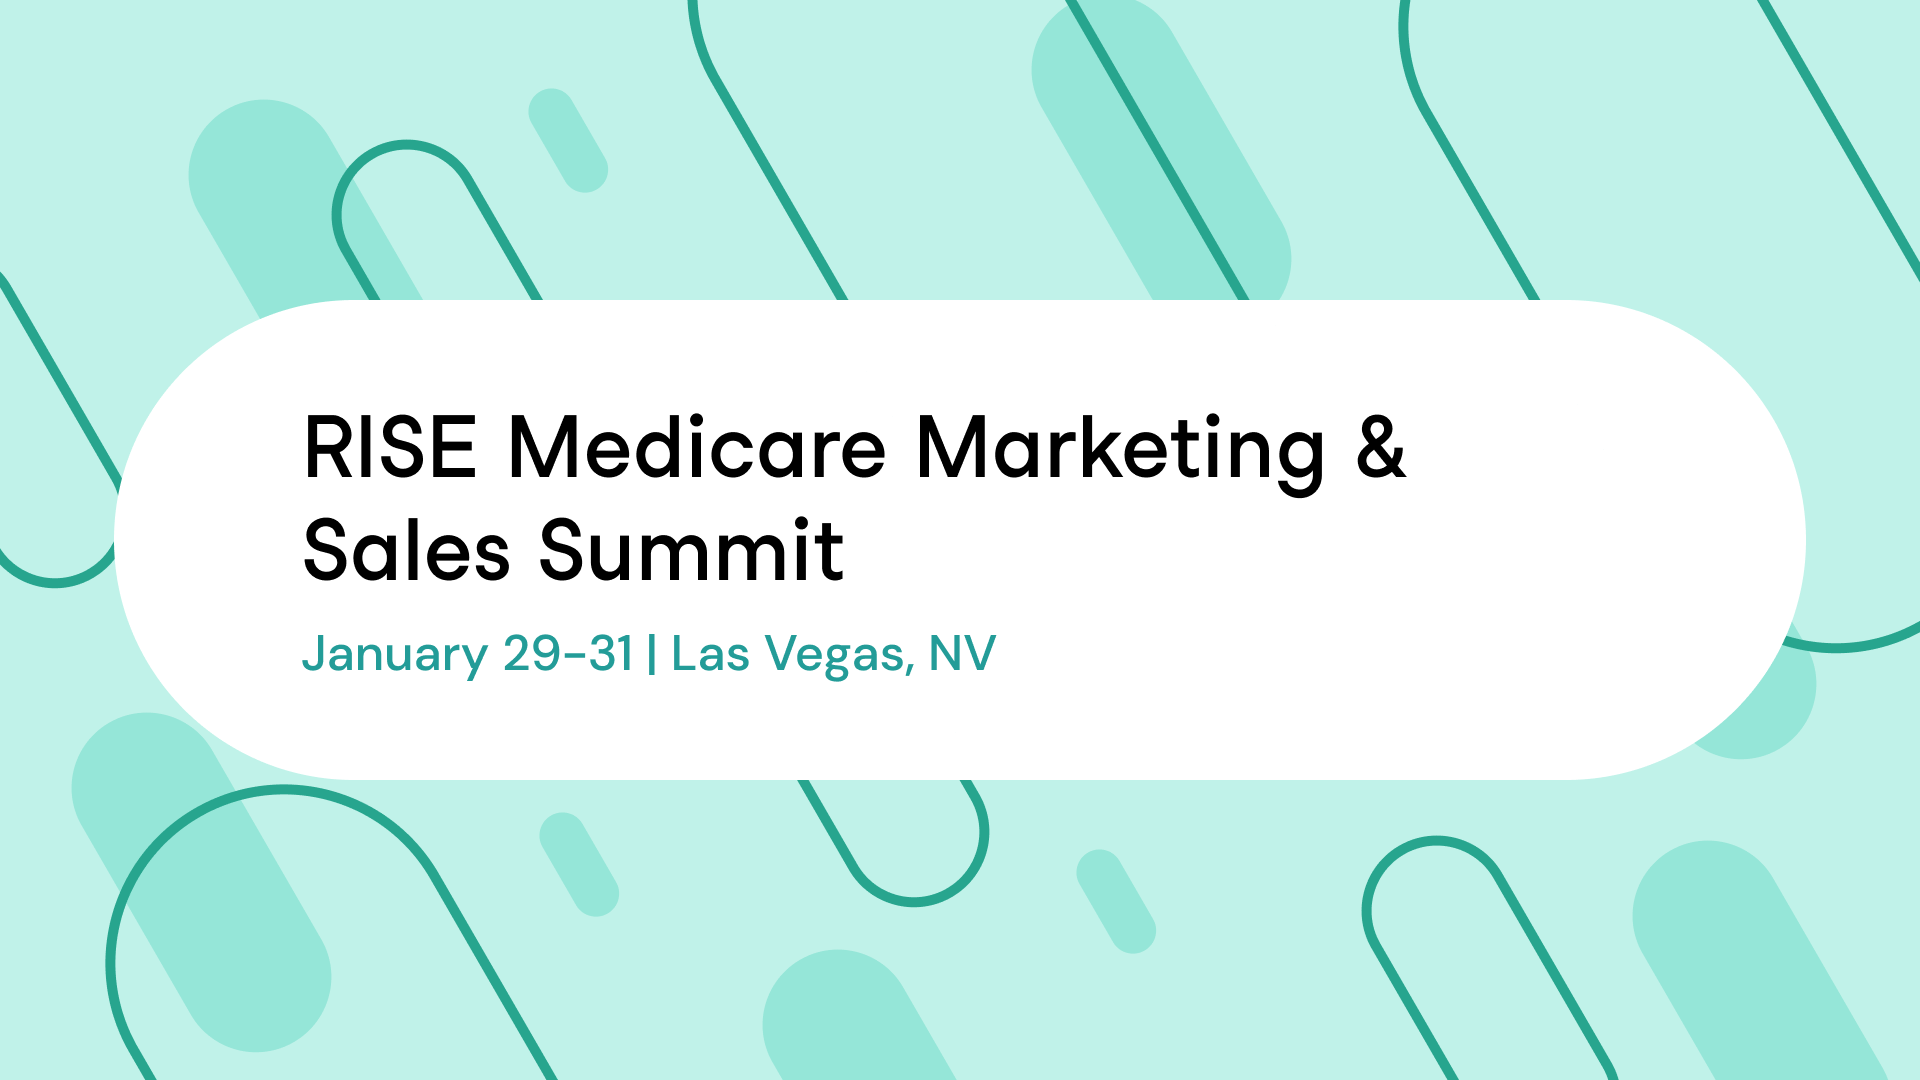 RISE Medicare Marketing & Sales Summit | Authenticx at Events